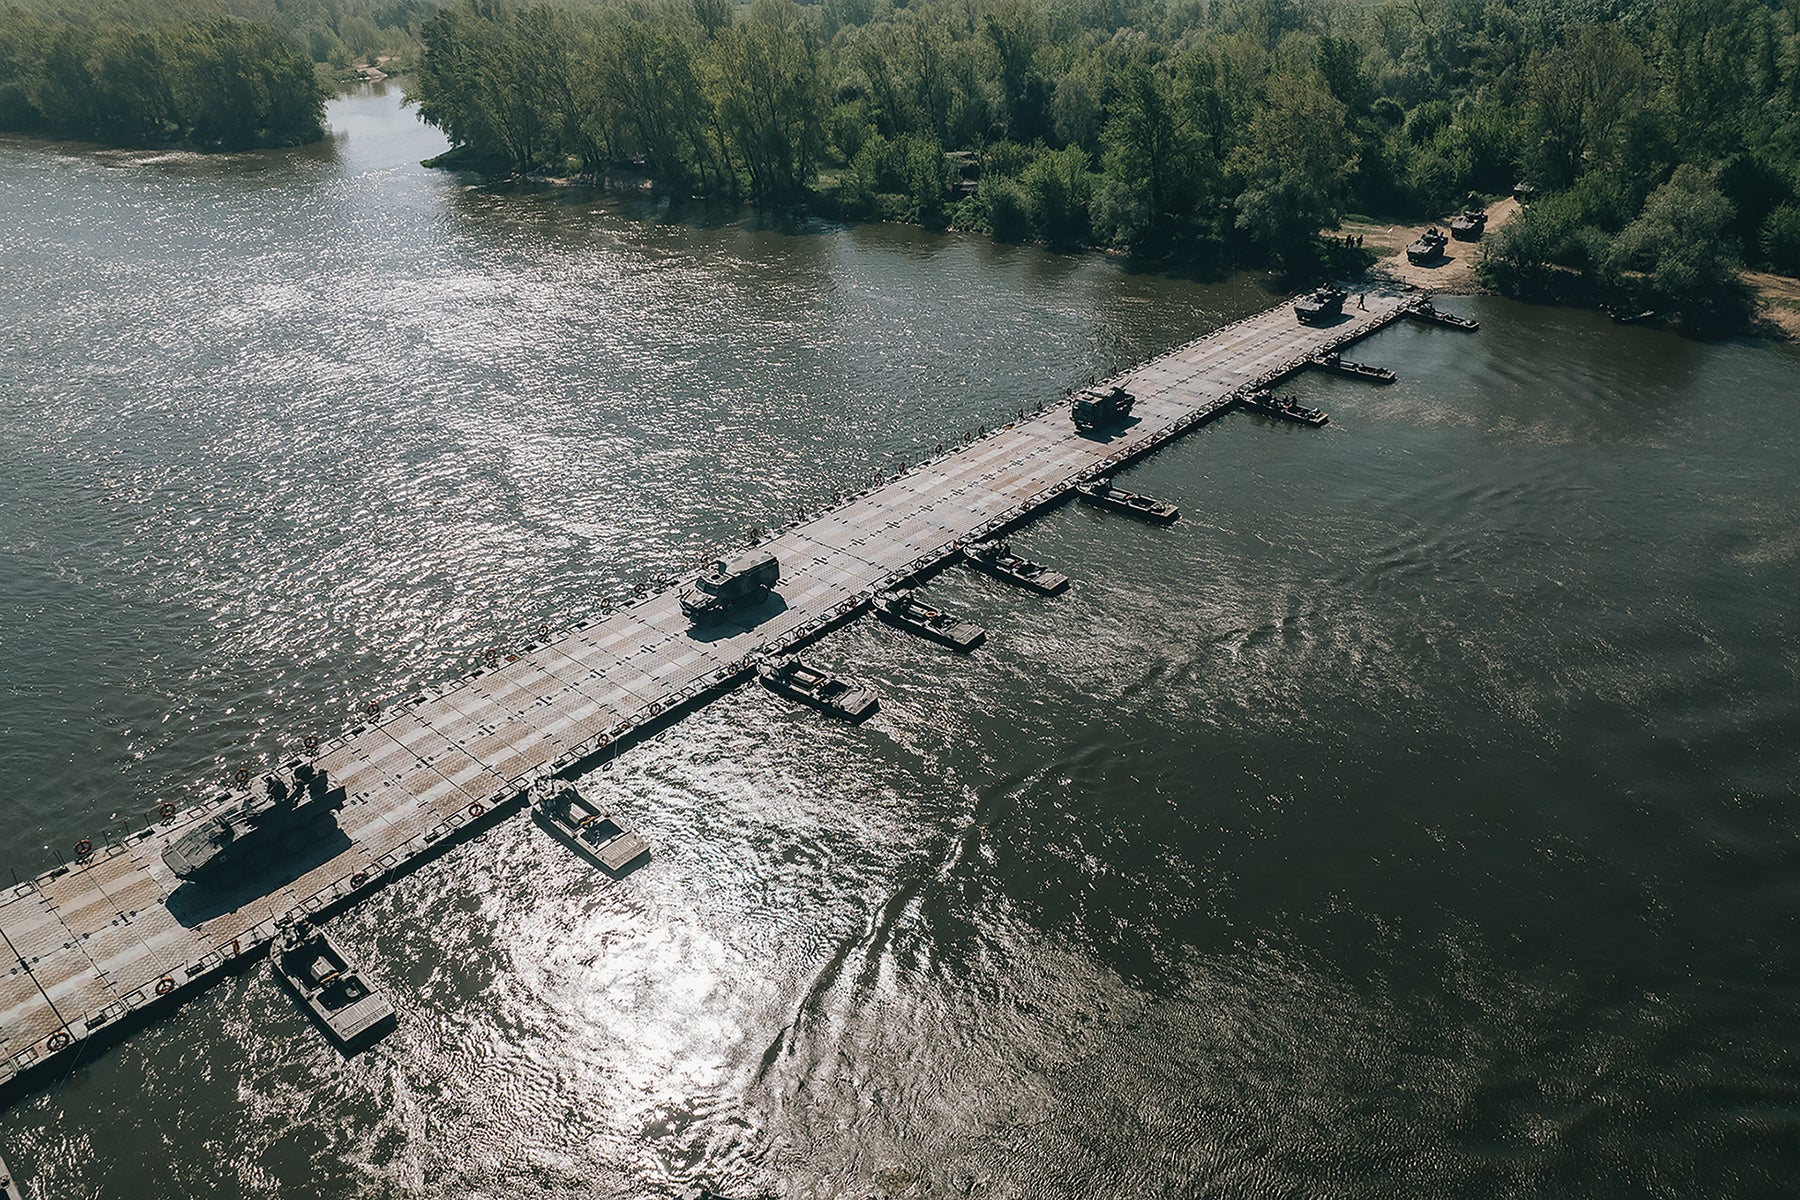 European allies and U.S. troops cross the Vistula River in Poland using a float ribbon bridge constructed from U.S. Army pre-positioned equipment. (Credit: DoD/Michal Czornij)